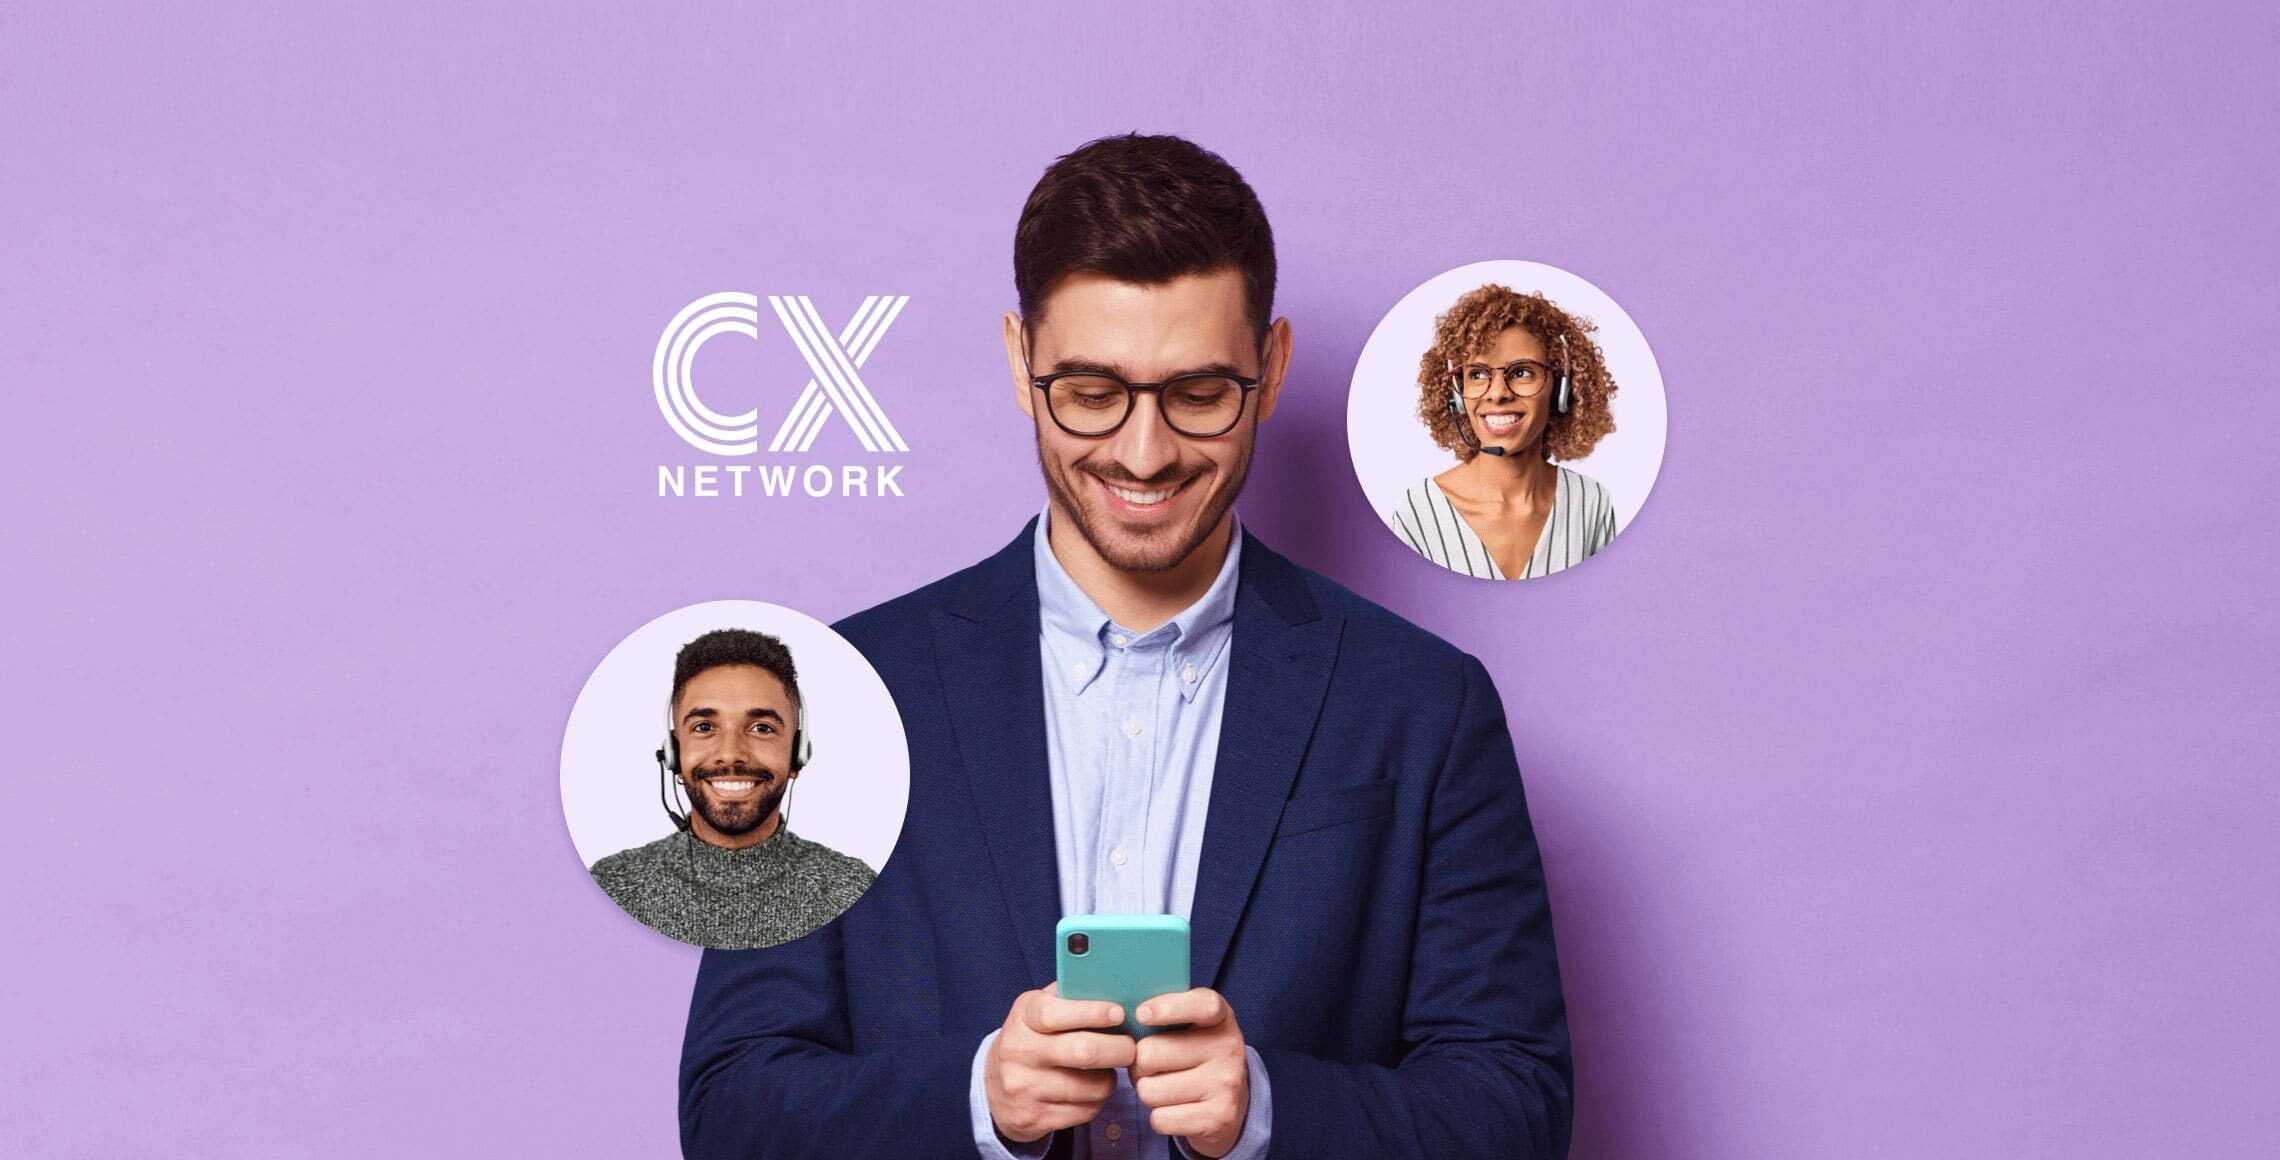 Cx Network Experts Insights